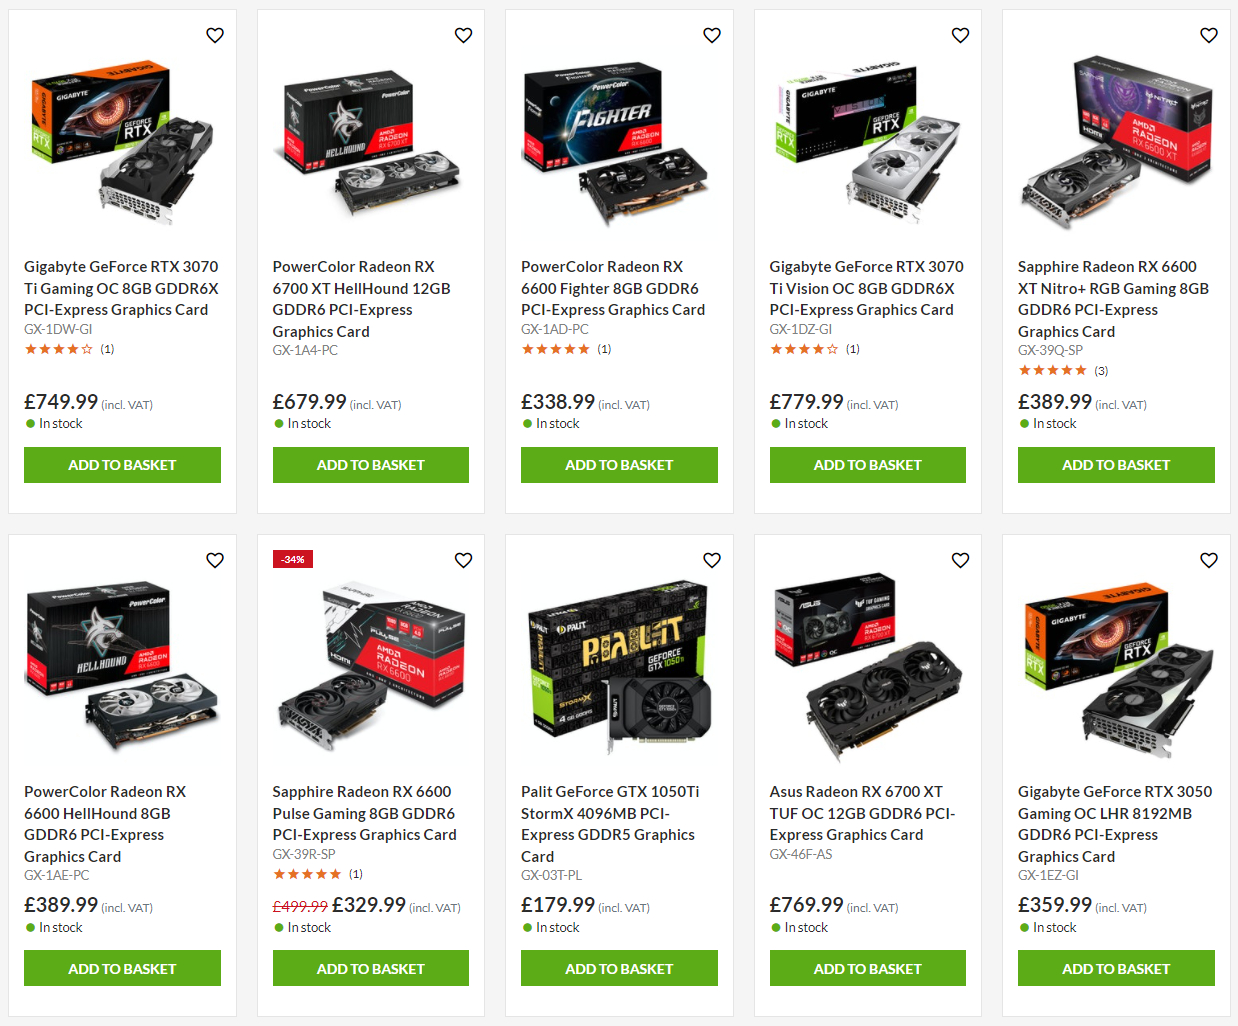 Screenshot of the Overclockers UK website with a graphics card search term showing many GPUs in stock